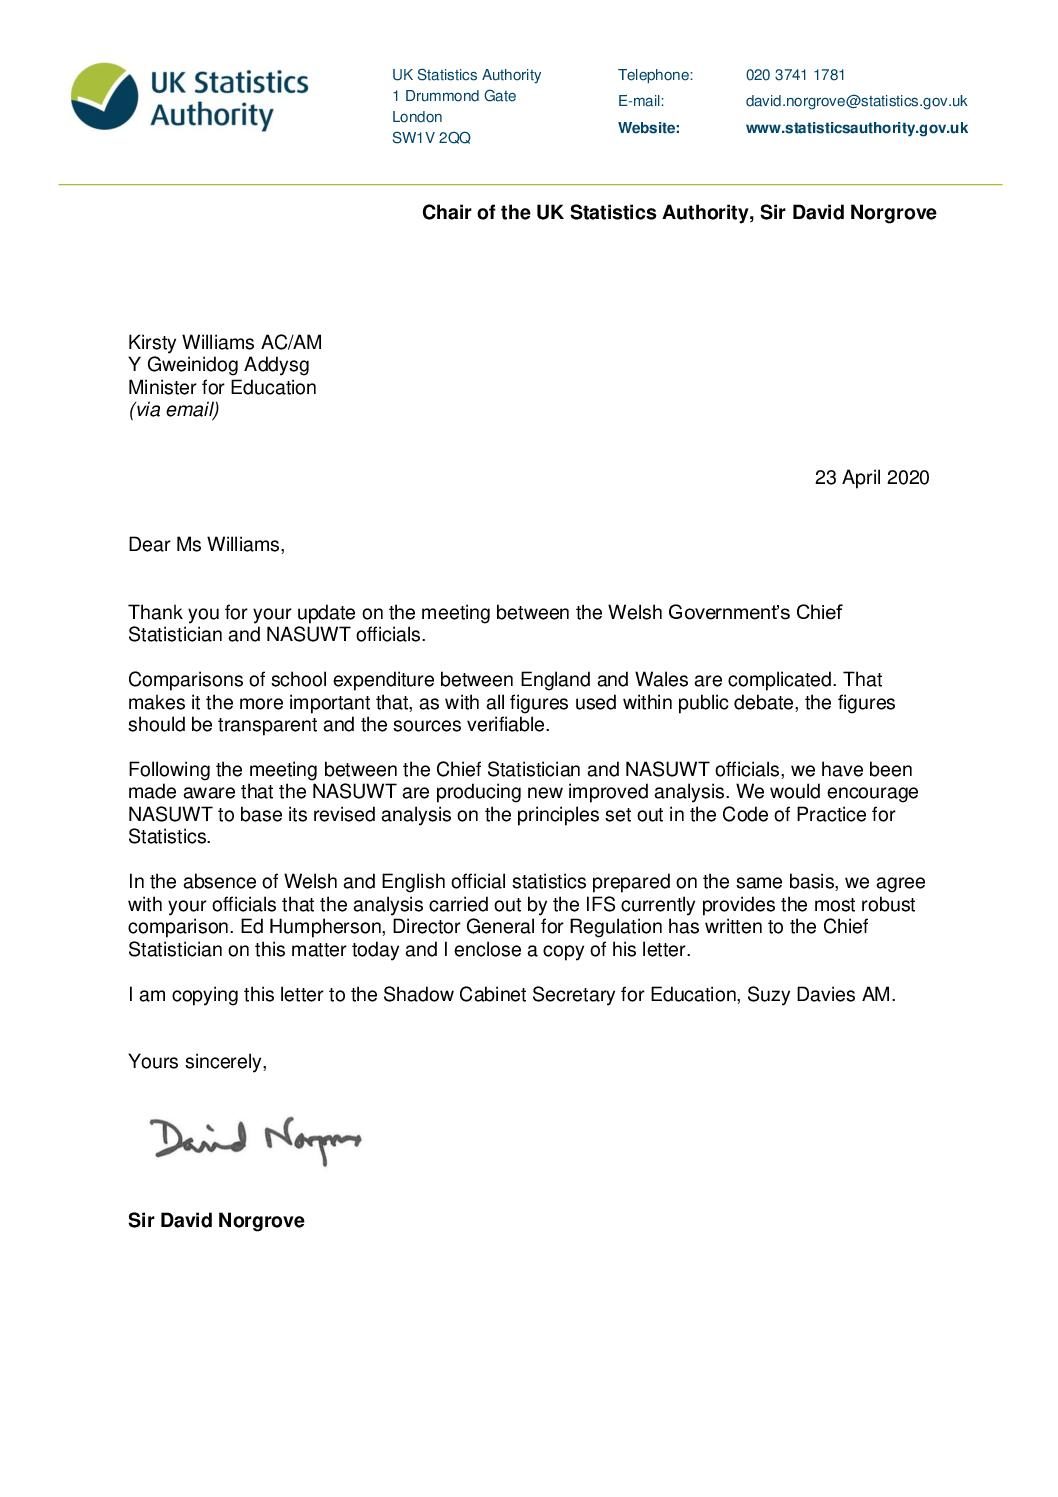 Response from Sir David Norgrove to Kirsty Williams, Education Minister, on school expenditure